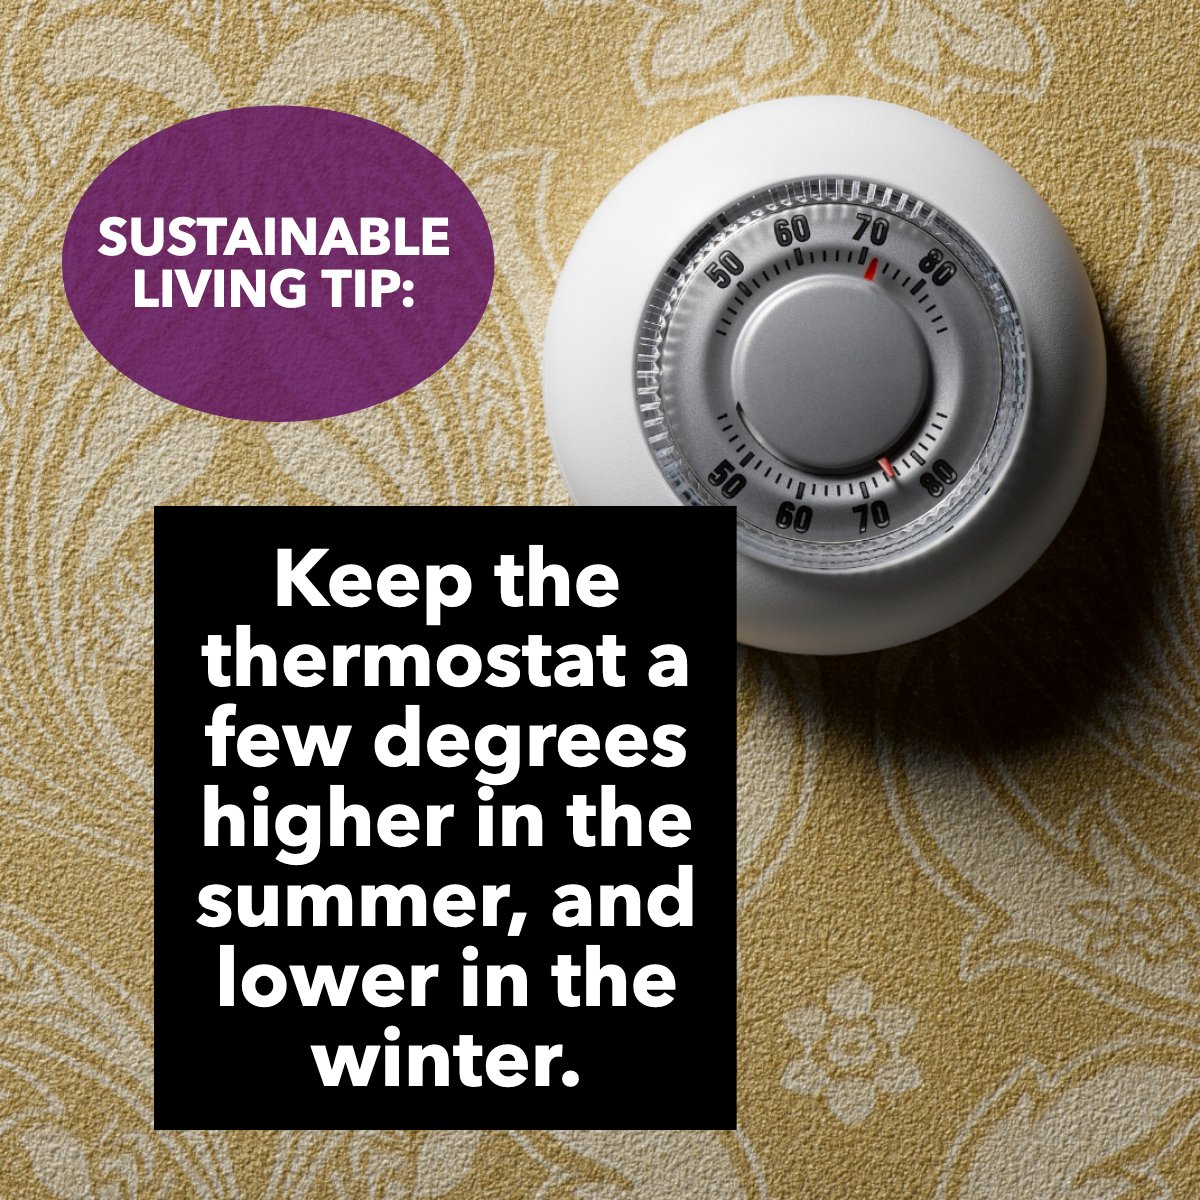 Here is a useful tip! 

Let's try it this and every season! ❄️

#sustainablelifestyle #sustainable #sustainablity #thermostat
 #TroySage #Realtor #HomesForSale #RealEstate #RealEstateMarket #realestateinsider #RealEstateMarket